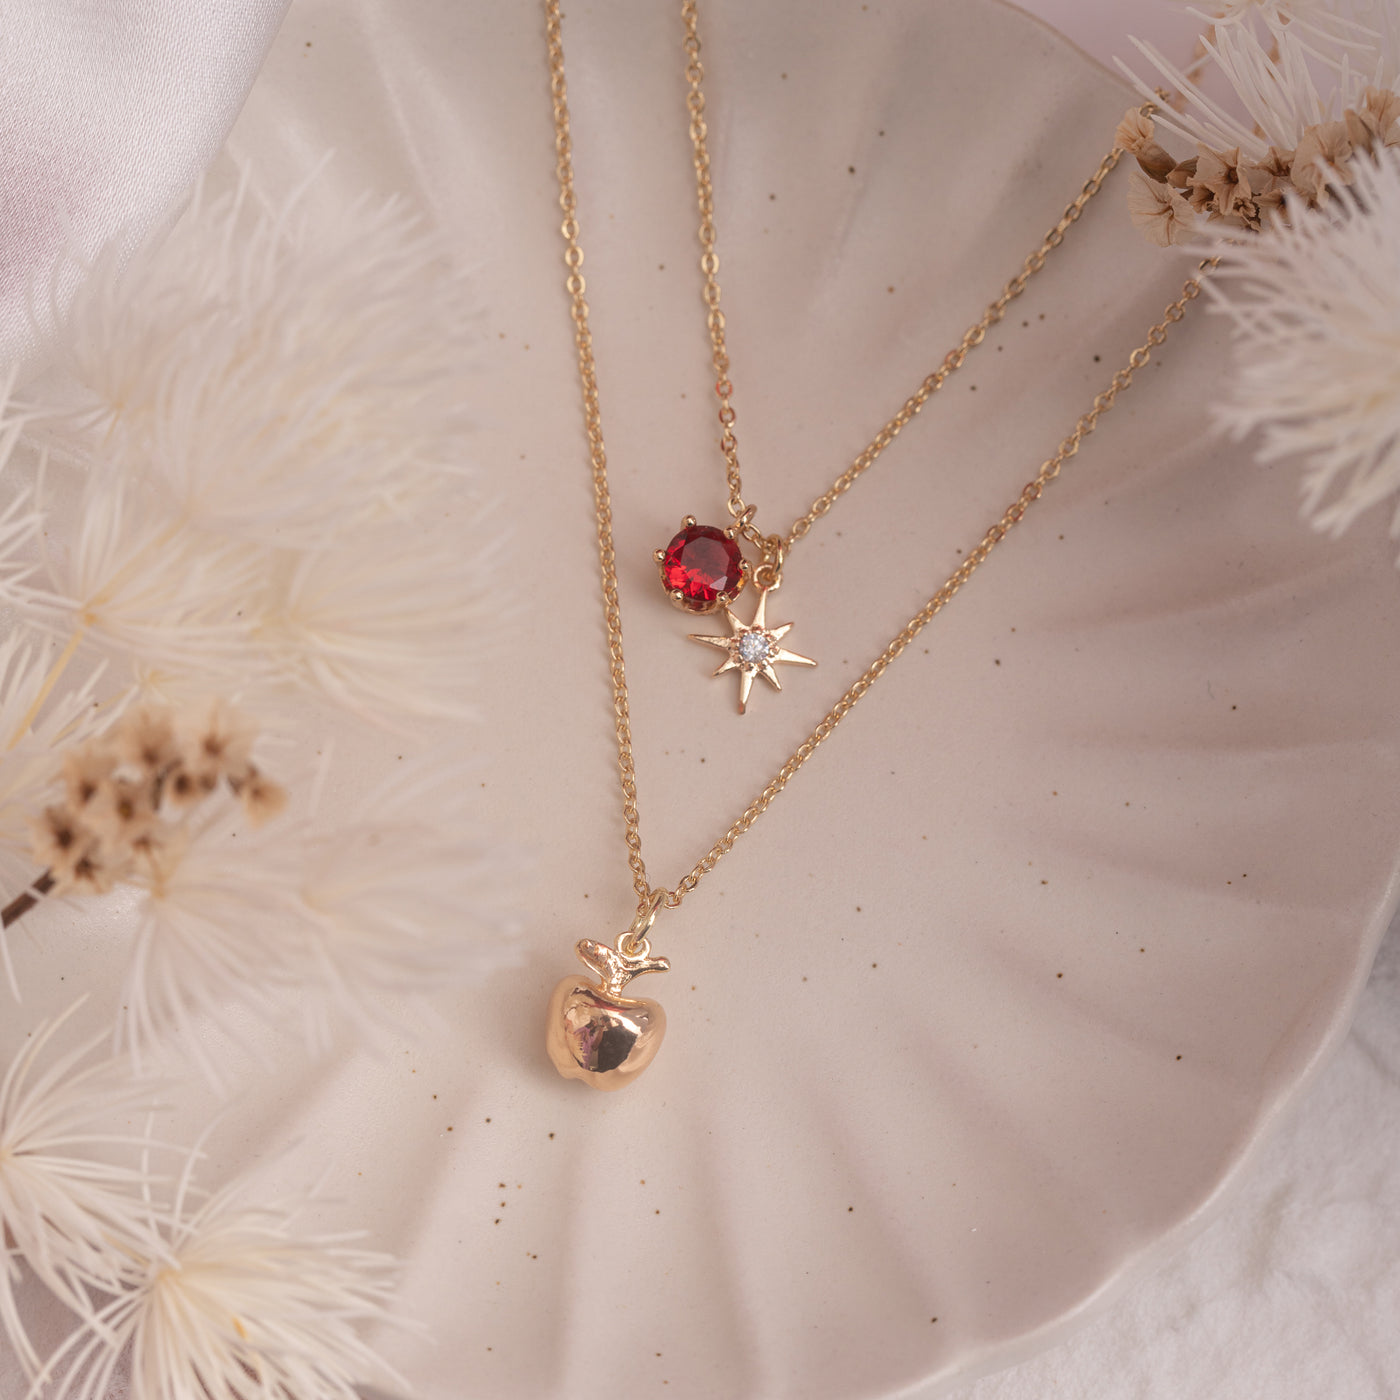 Snow White Dream Necklace - Limited Edition